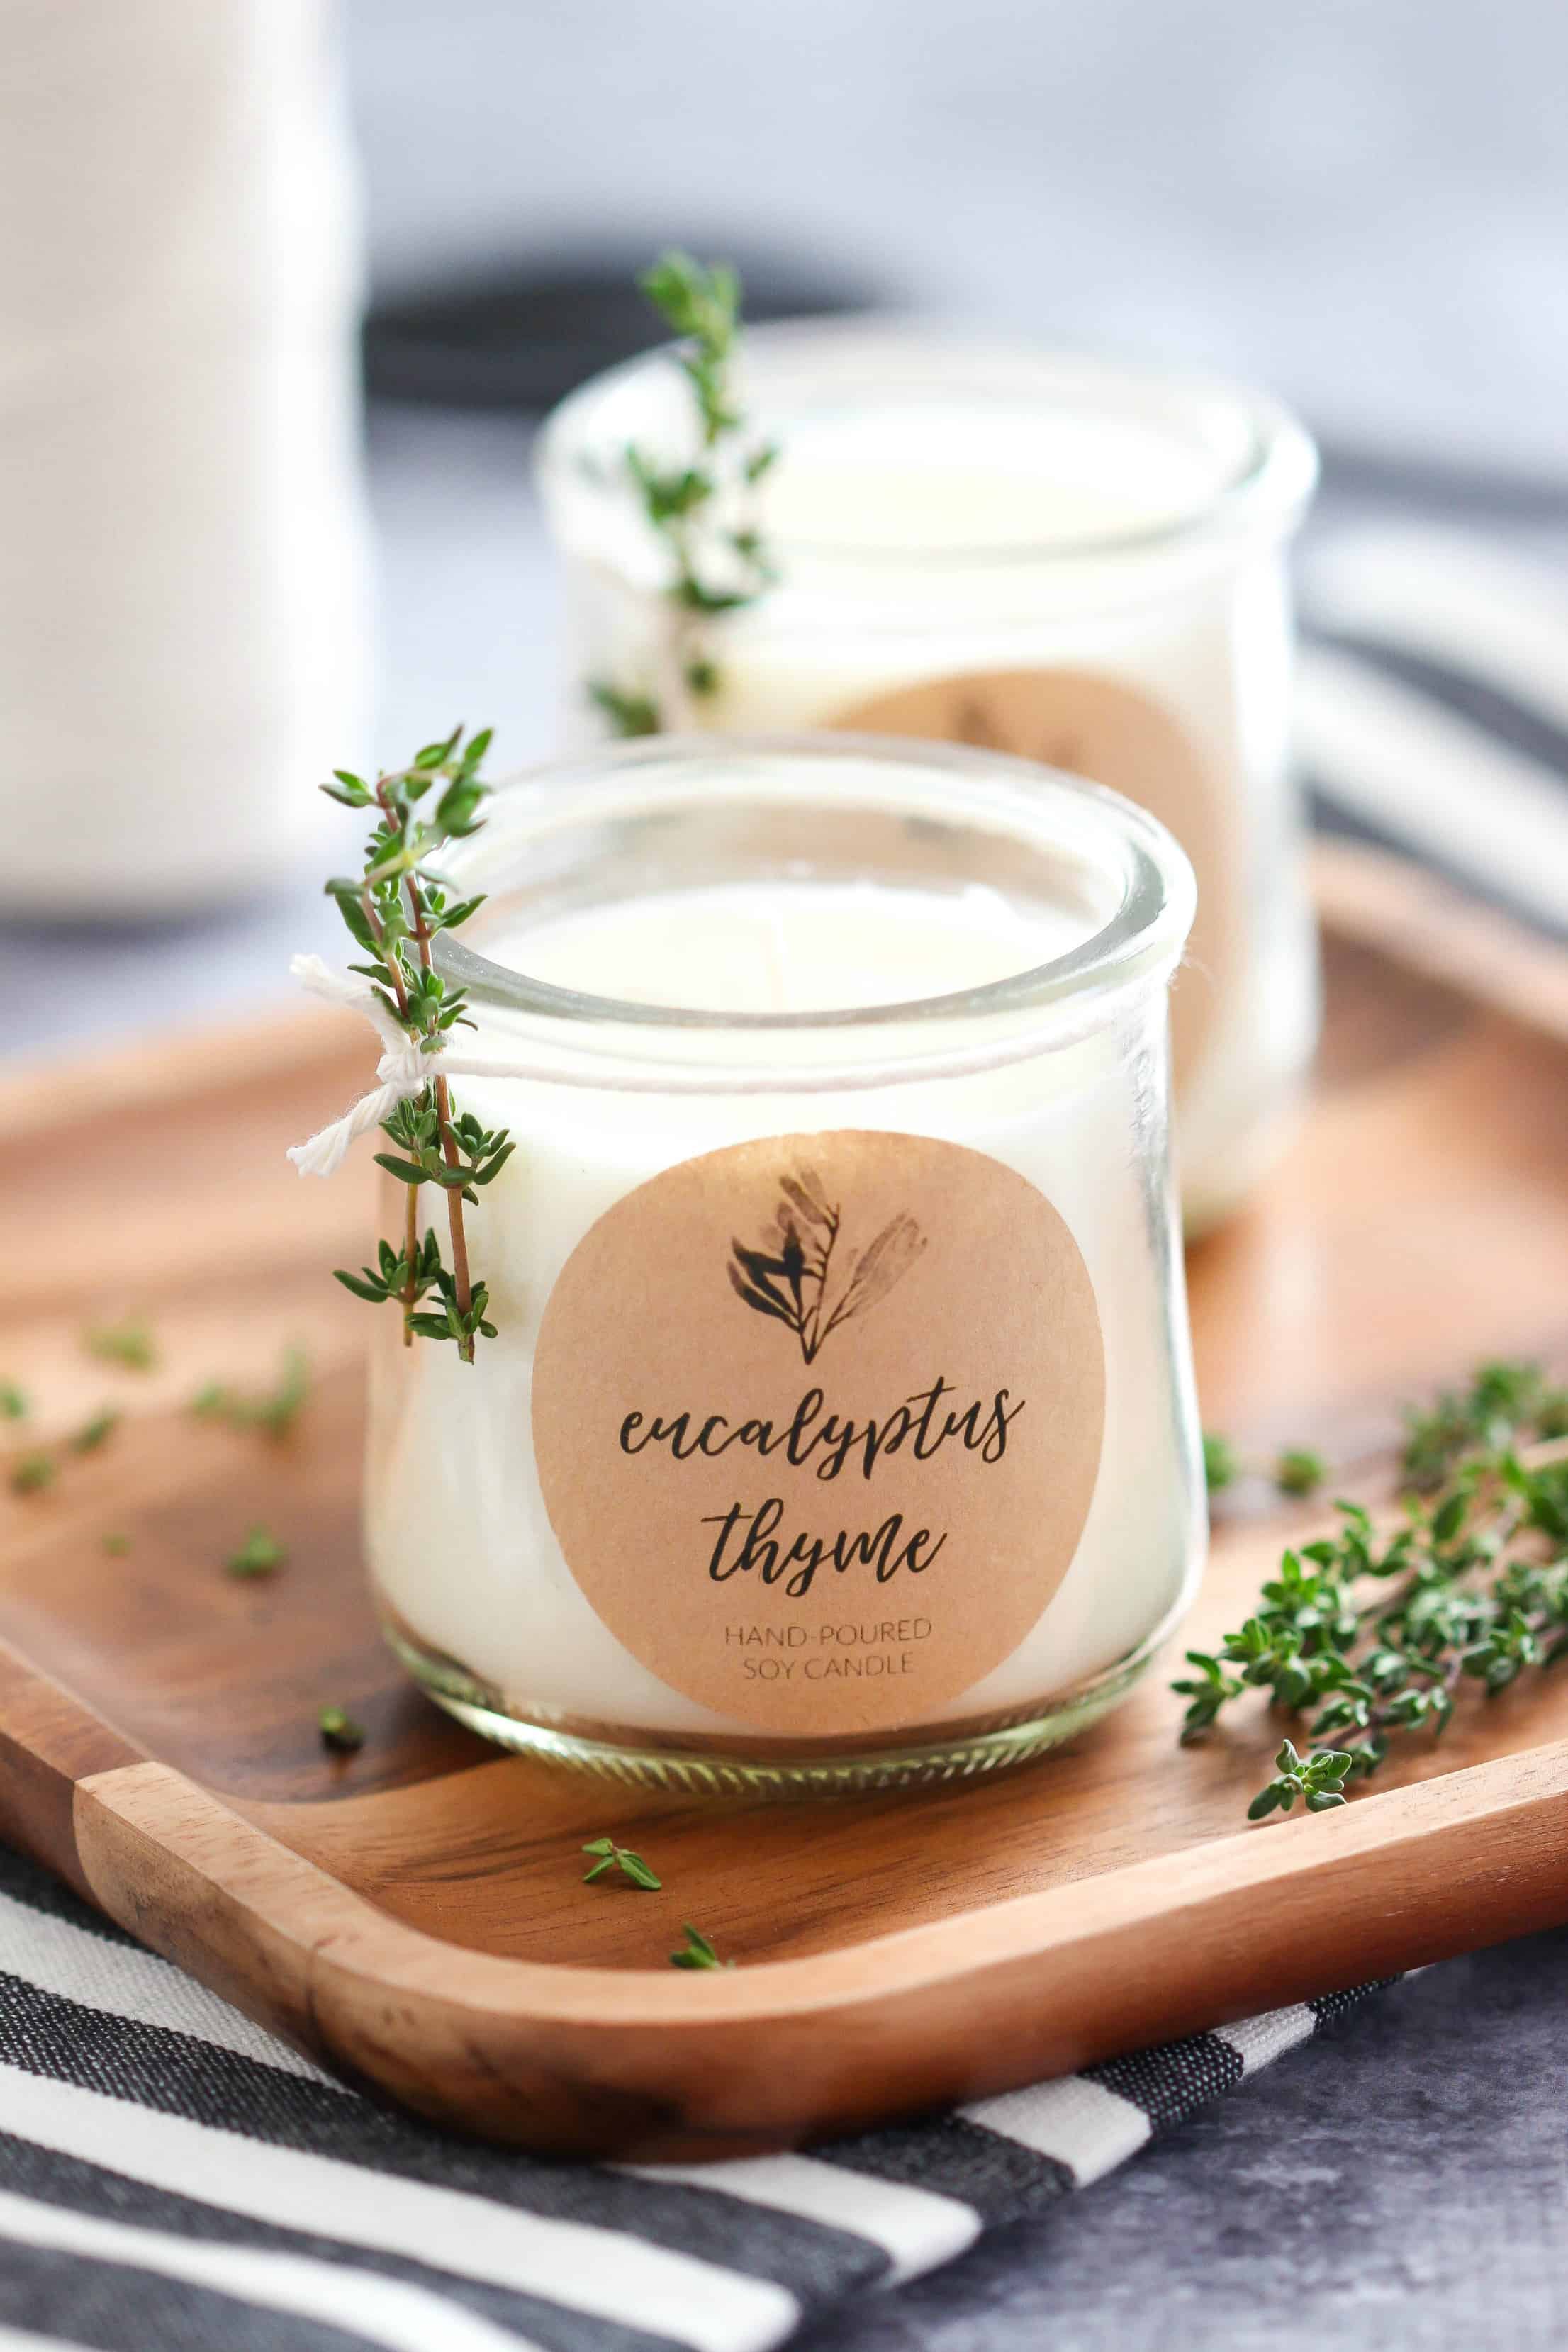 25 Creative and Unique DIY Candle Ideas  Diy candles, Candles, Picture  gifts diy